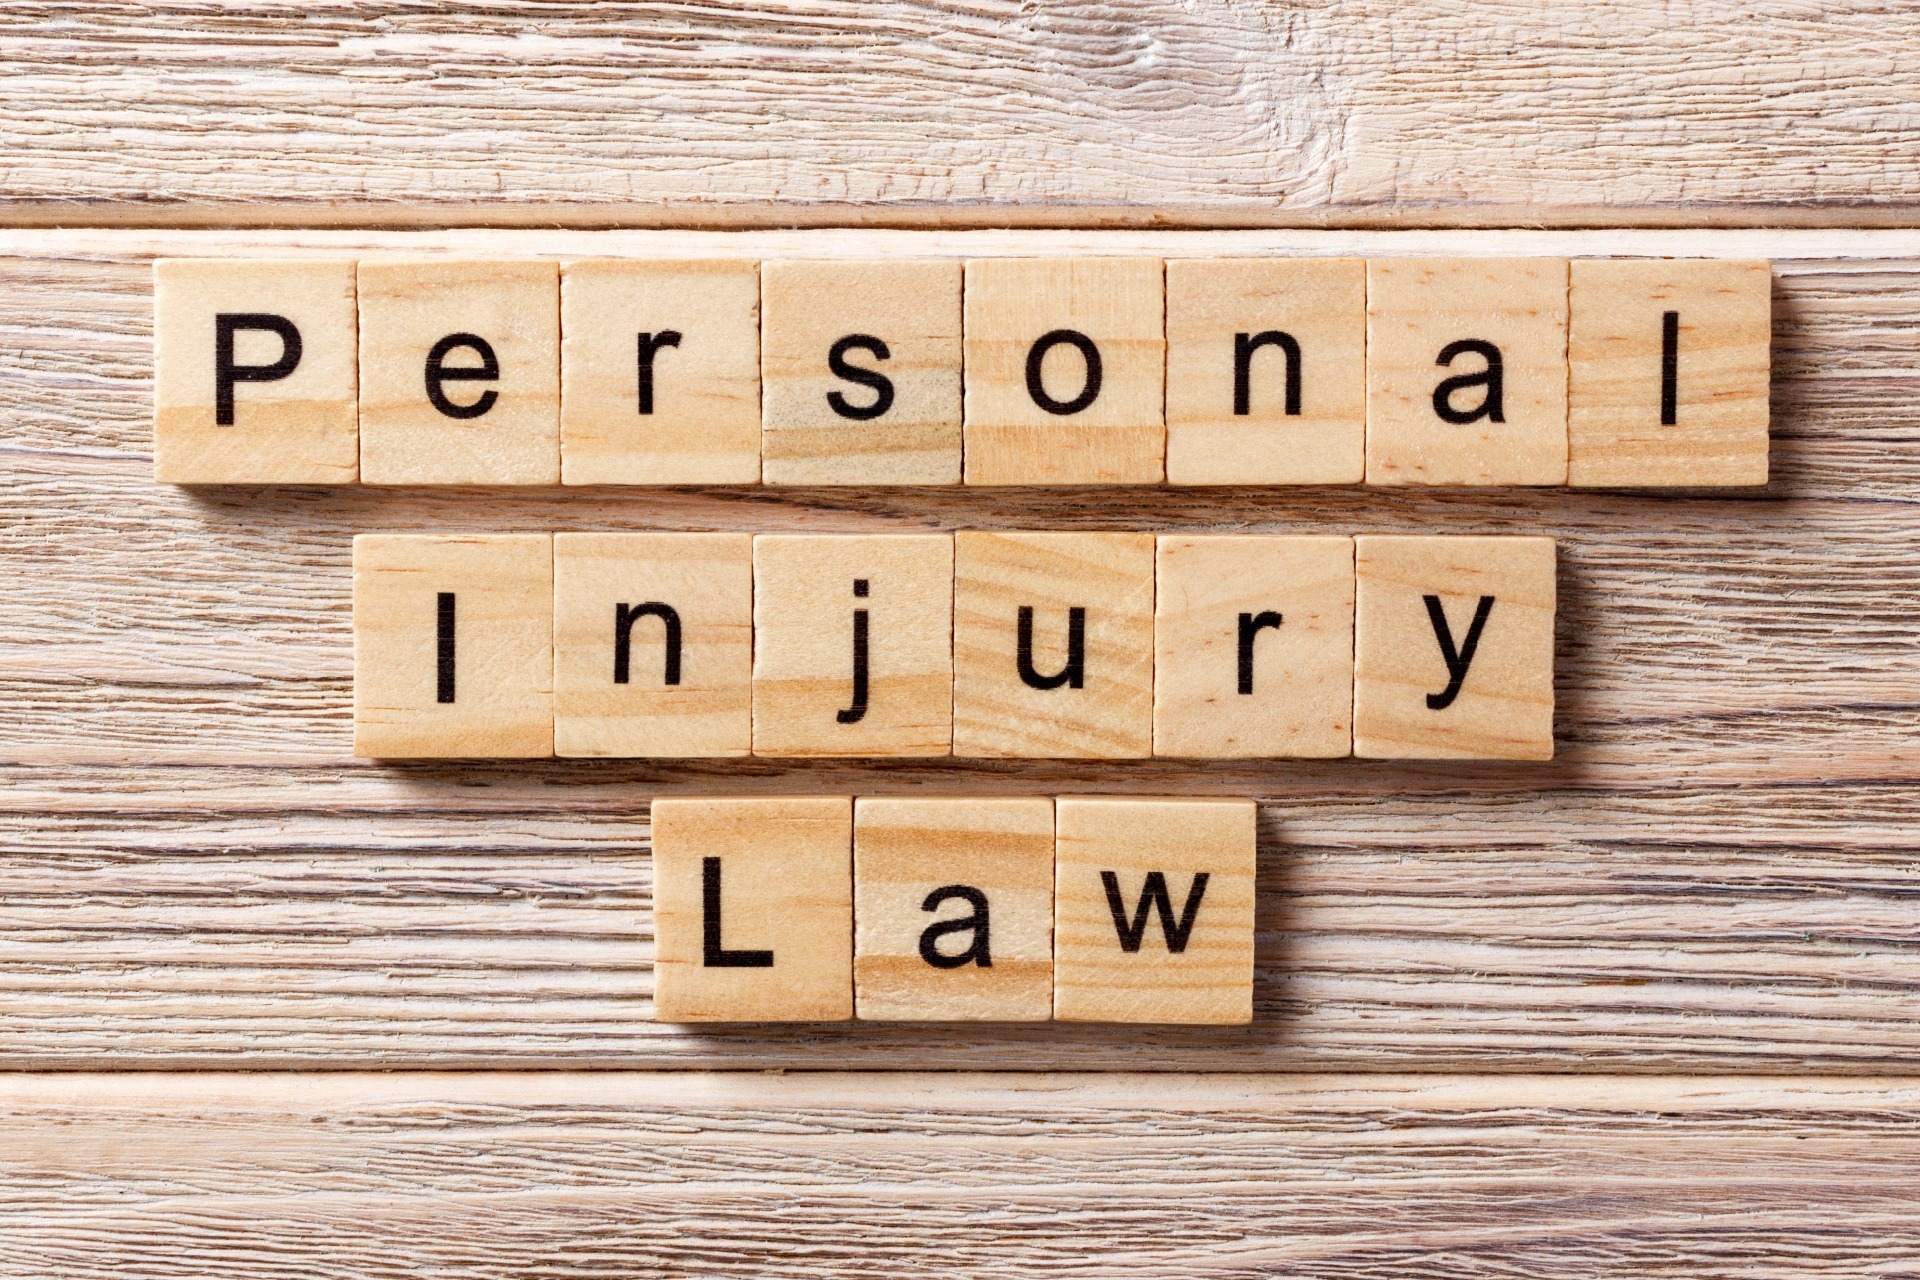 "Personal Injury Law" in scrabble letters, on a wooden table; our No Win No Fee Personal Injury Solicitors explain qualified one way cost shifting in personal injury compensation claims, and can help you make a no win no fee claim.